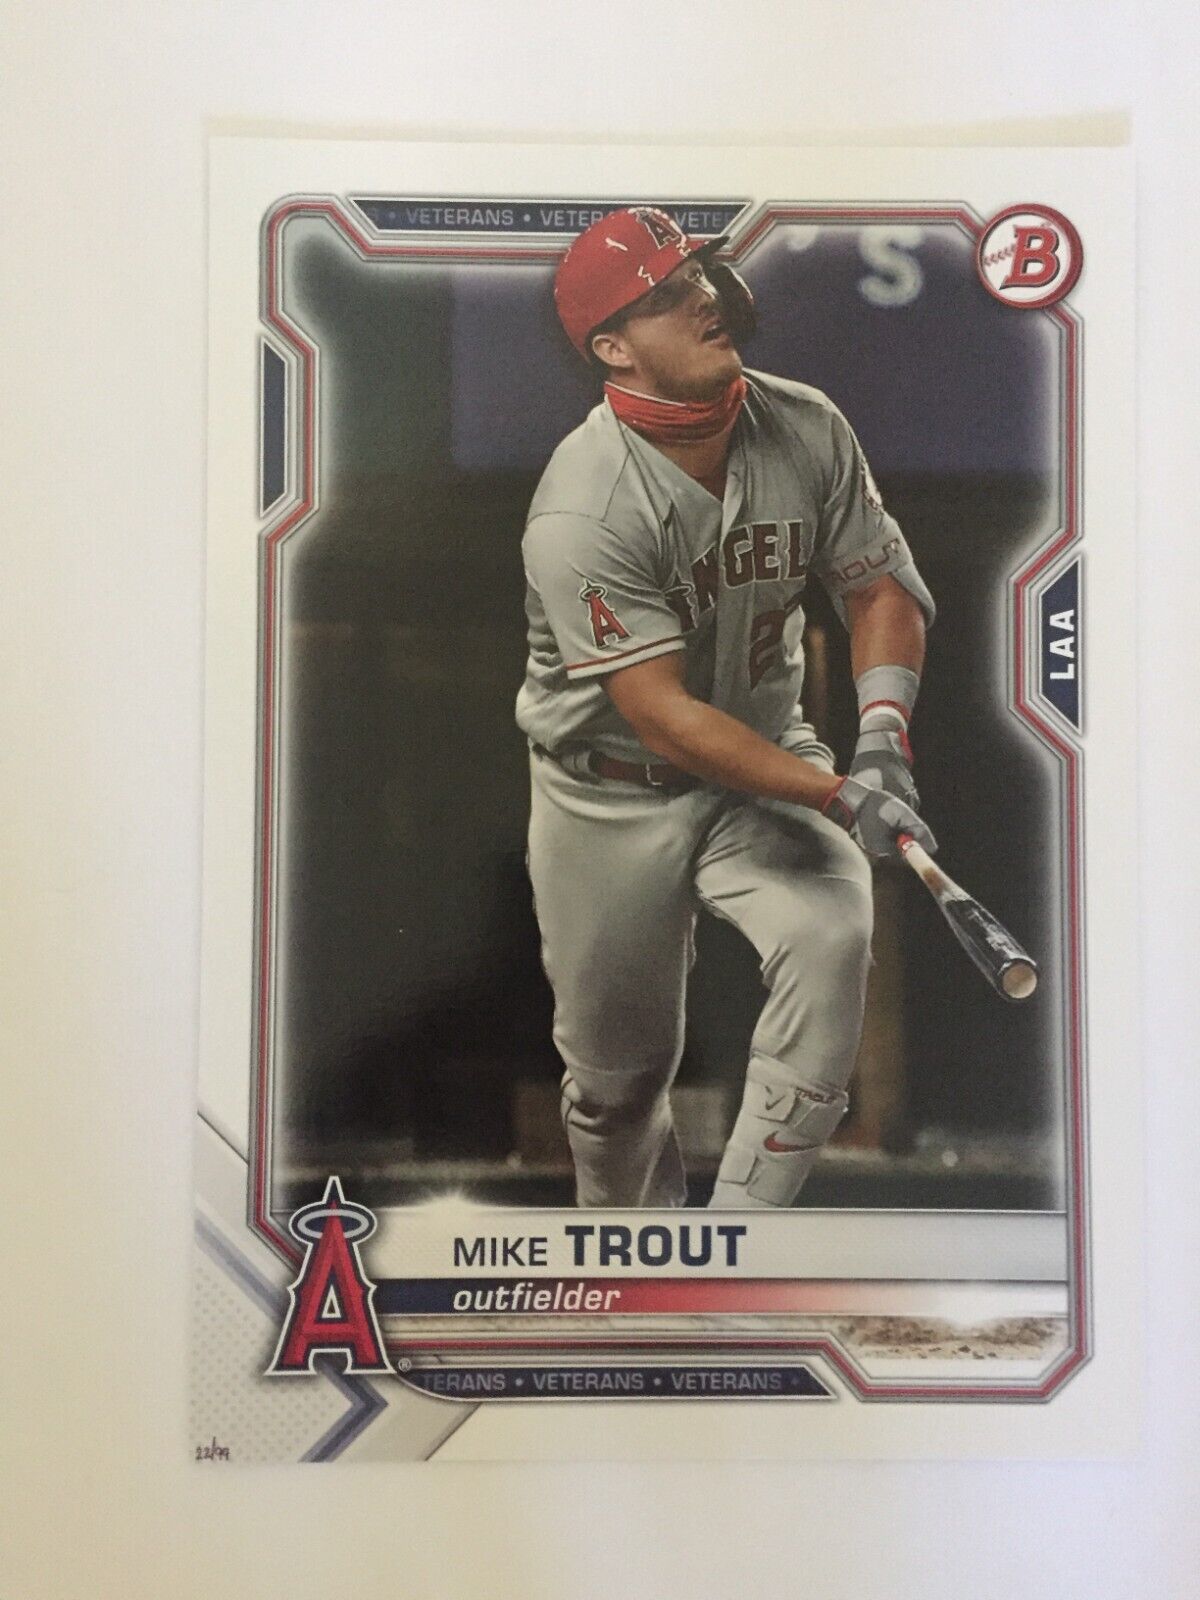 2021 Bowman Baseball Base Card Los Angeles Angels Mike Trout 14'' x 10'' Poster